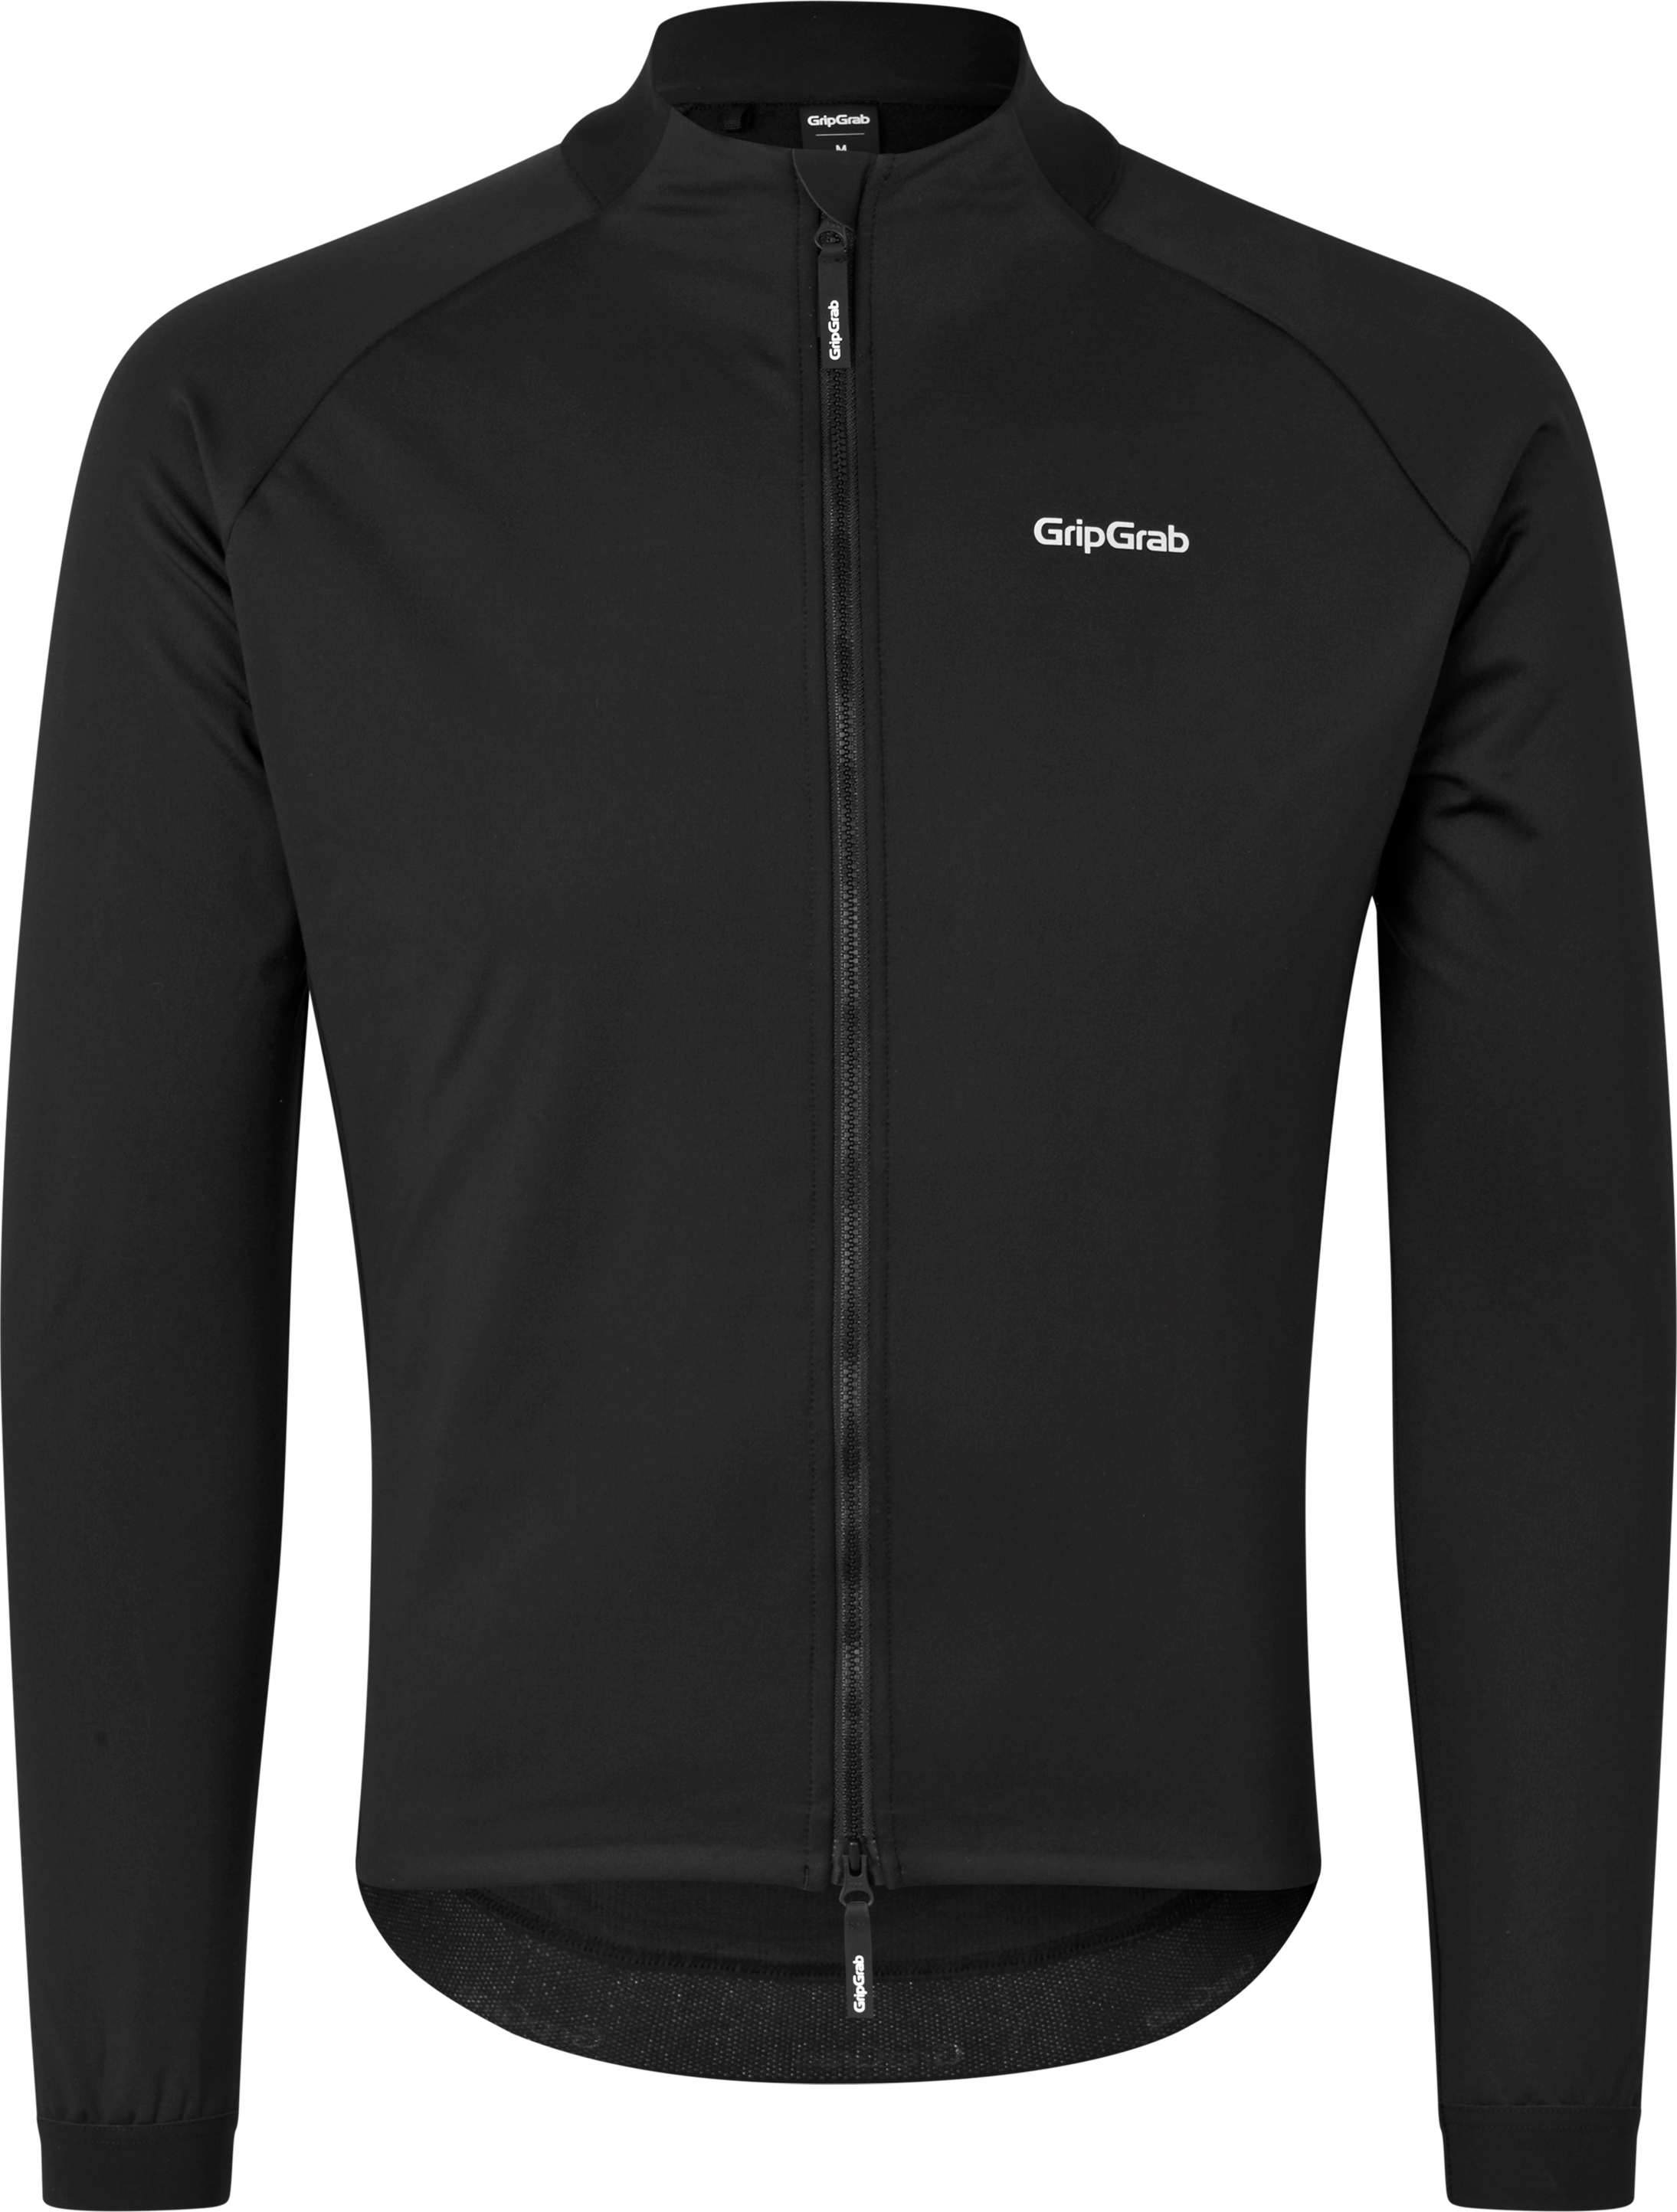 Gripgrab Men’s ThermaShell Windproof Winter Jacket Black